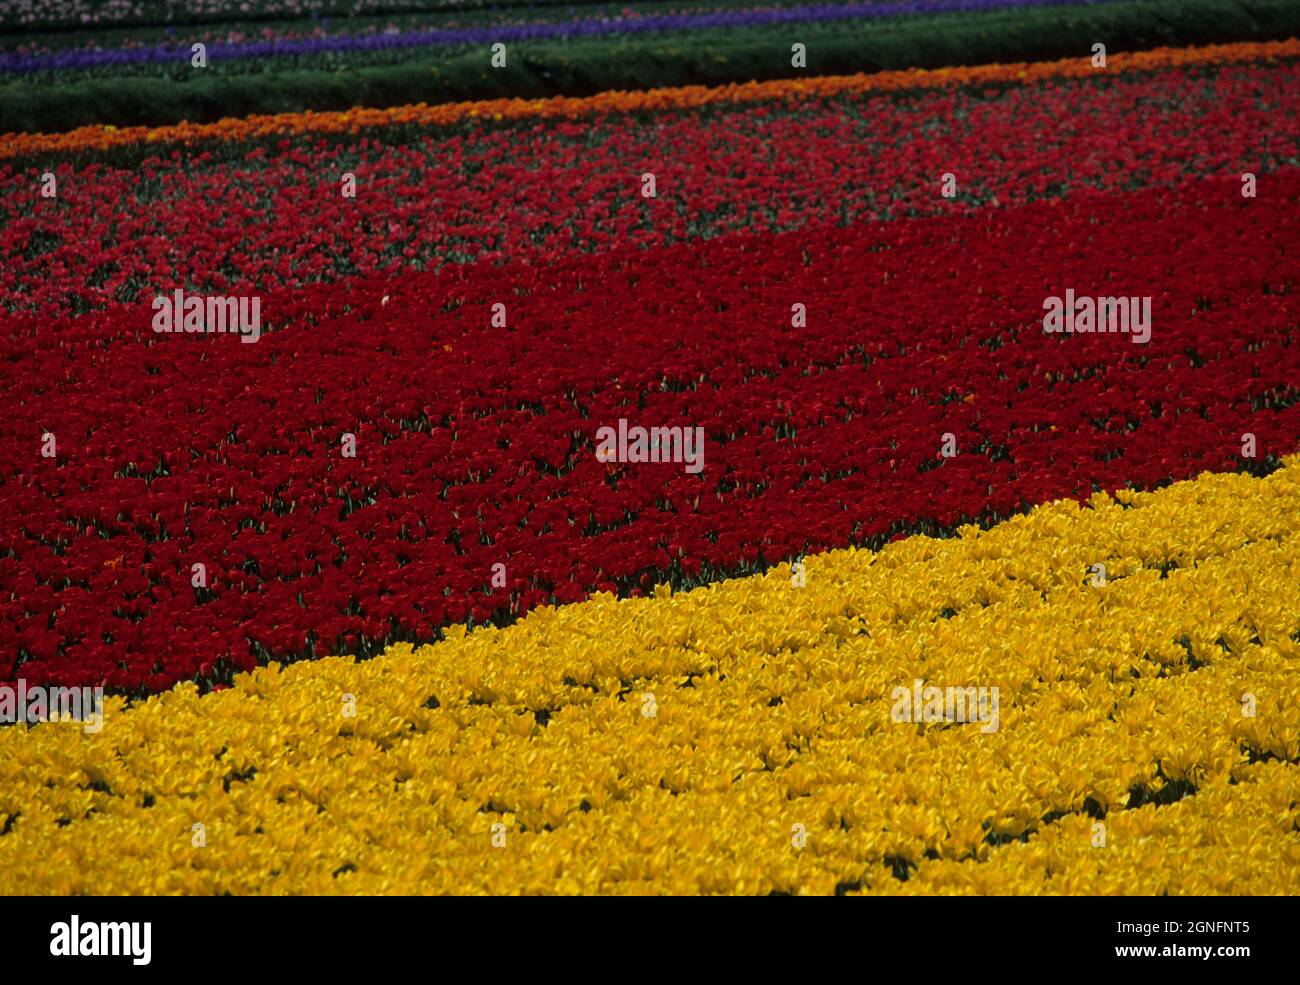 HOLLAND, NETHERLANDS, NOORD HOLLAND AND ZUID HOLLAND REGION, TULIPFIELDS OR BULBFIELDS Stock Photo